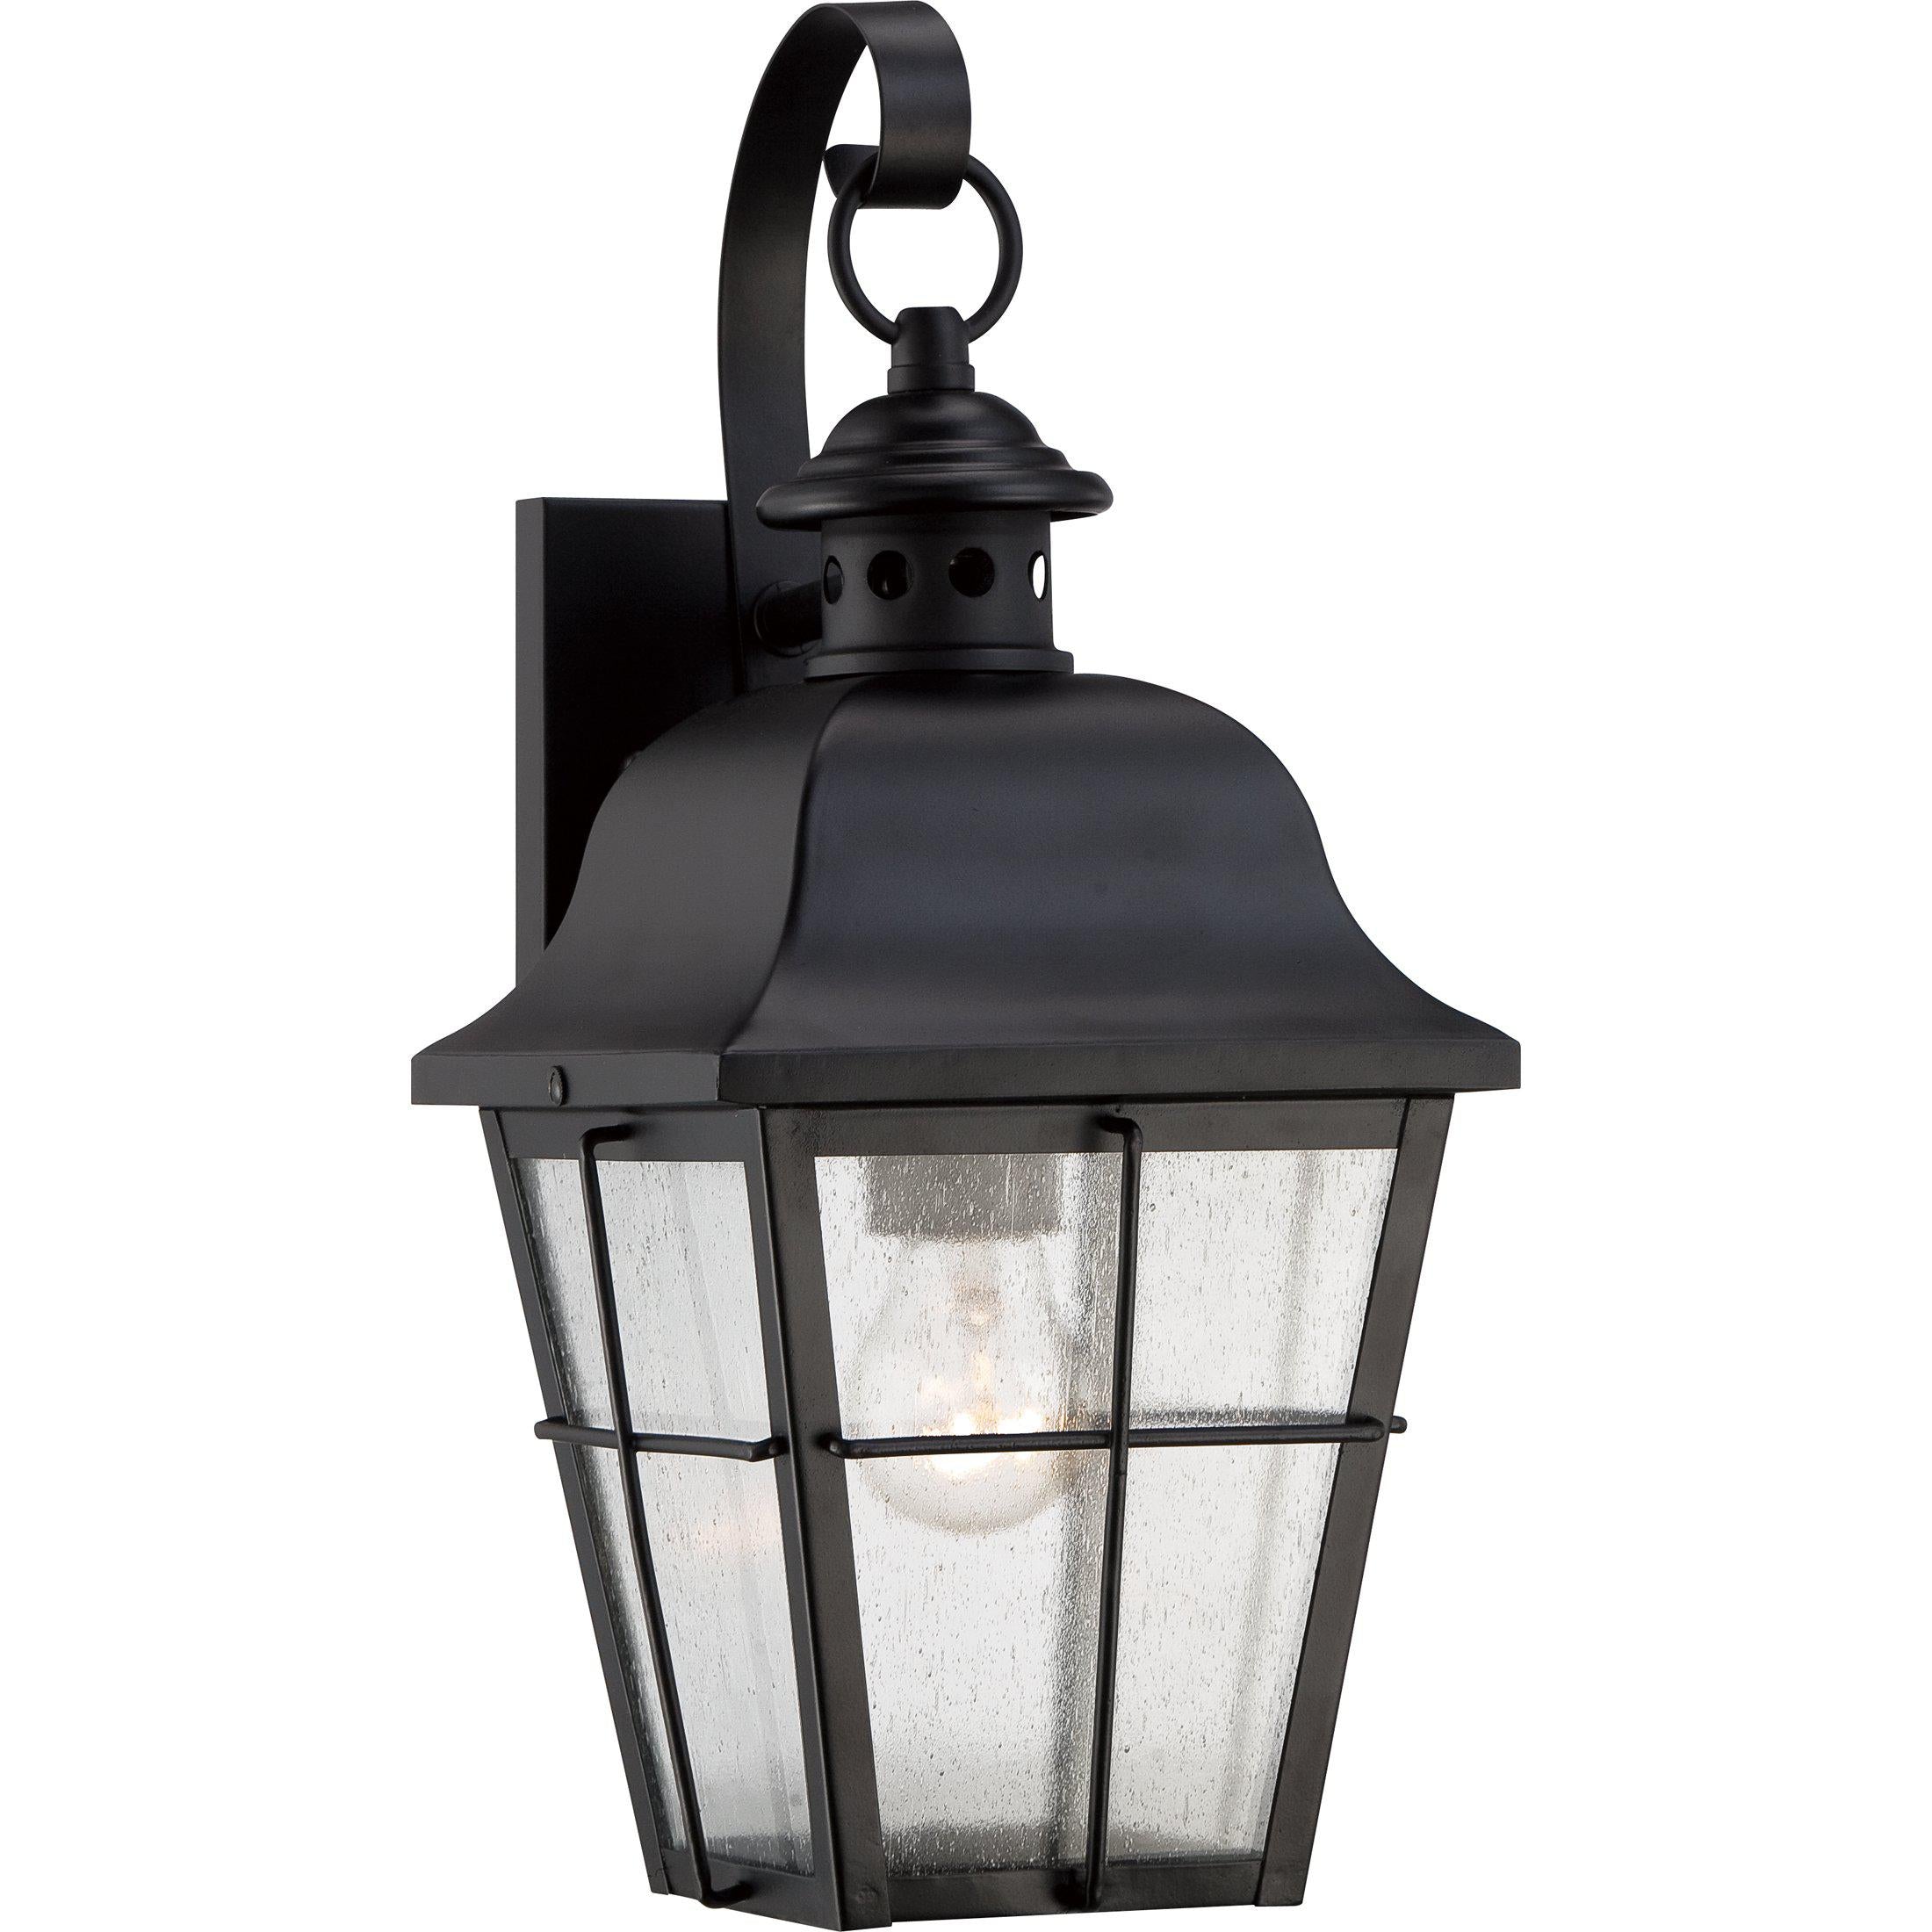 Quoizel  Millhouse Outdoor Lantern, Small Outdoor l Wall Quoizel Mystic Black  